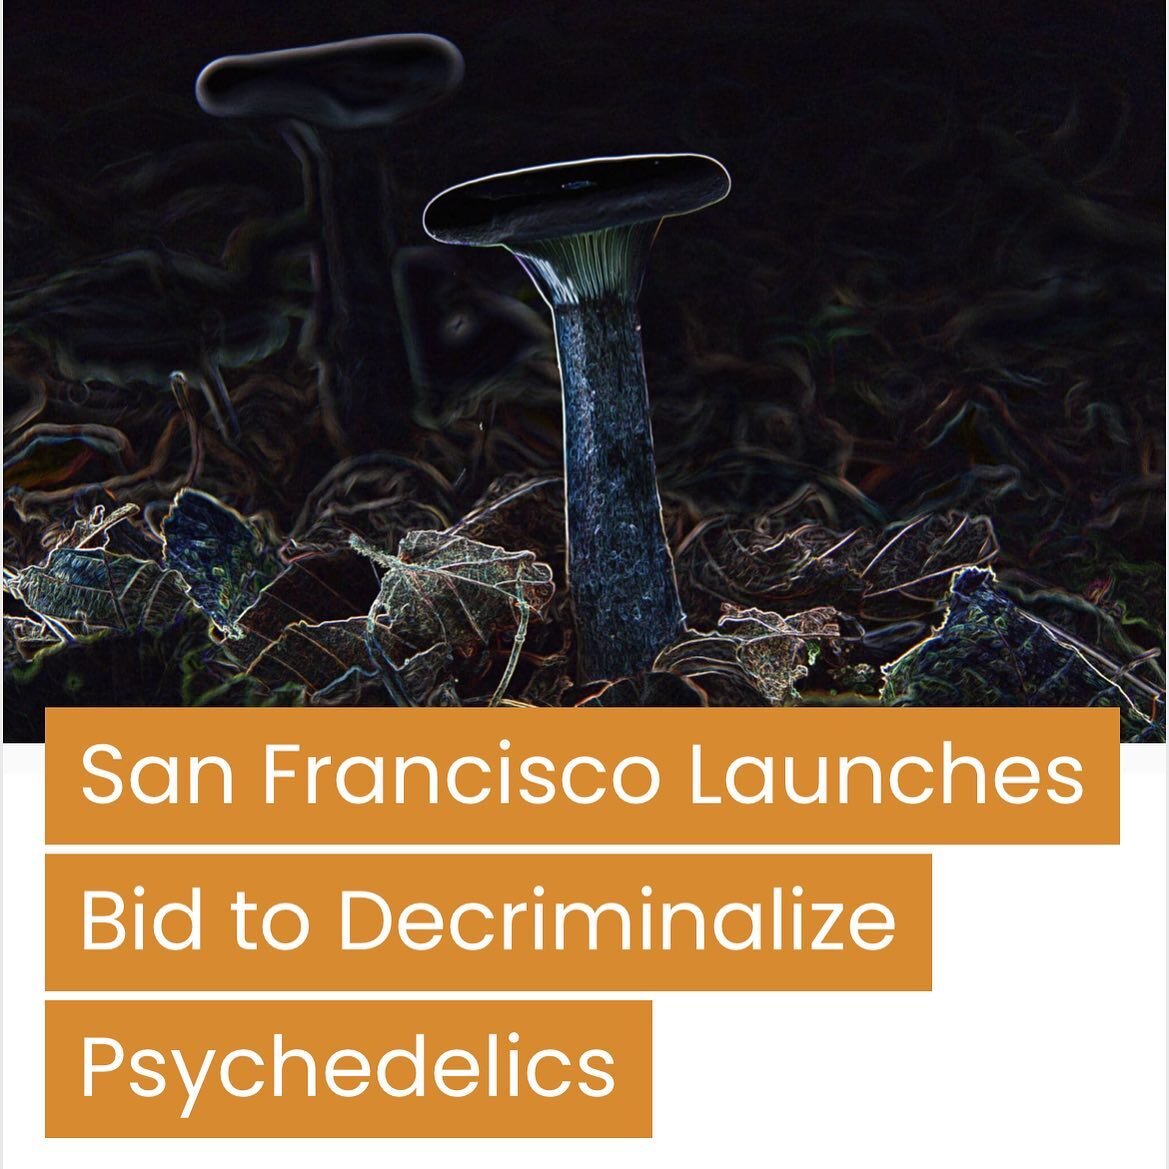 &ldquo;City lawmakers in San Francisco have introduced a resolution to decriminalize naturally occurring psychedelics, or &ldquo;entheogens.&rdquo; The measure would remove criminal penalties for possession of drugs like psilocybin or mescaline&mdash